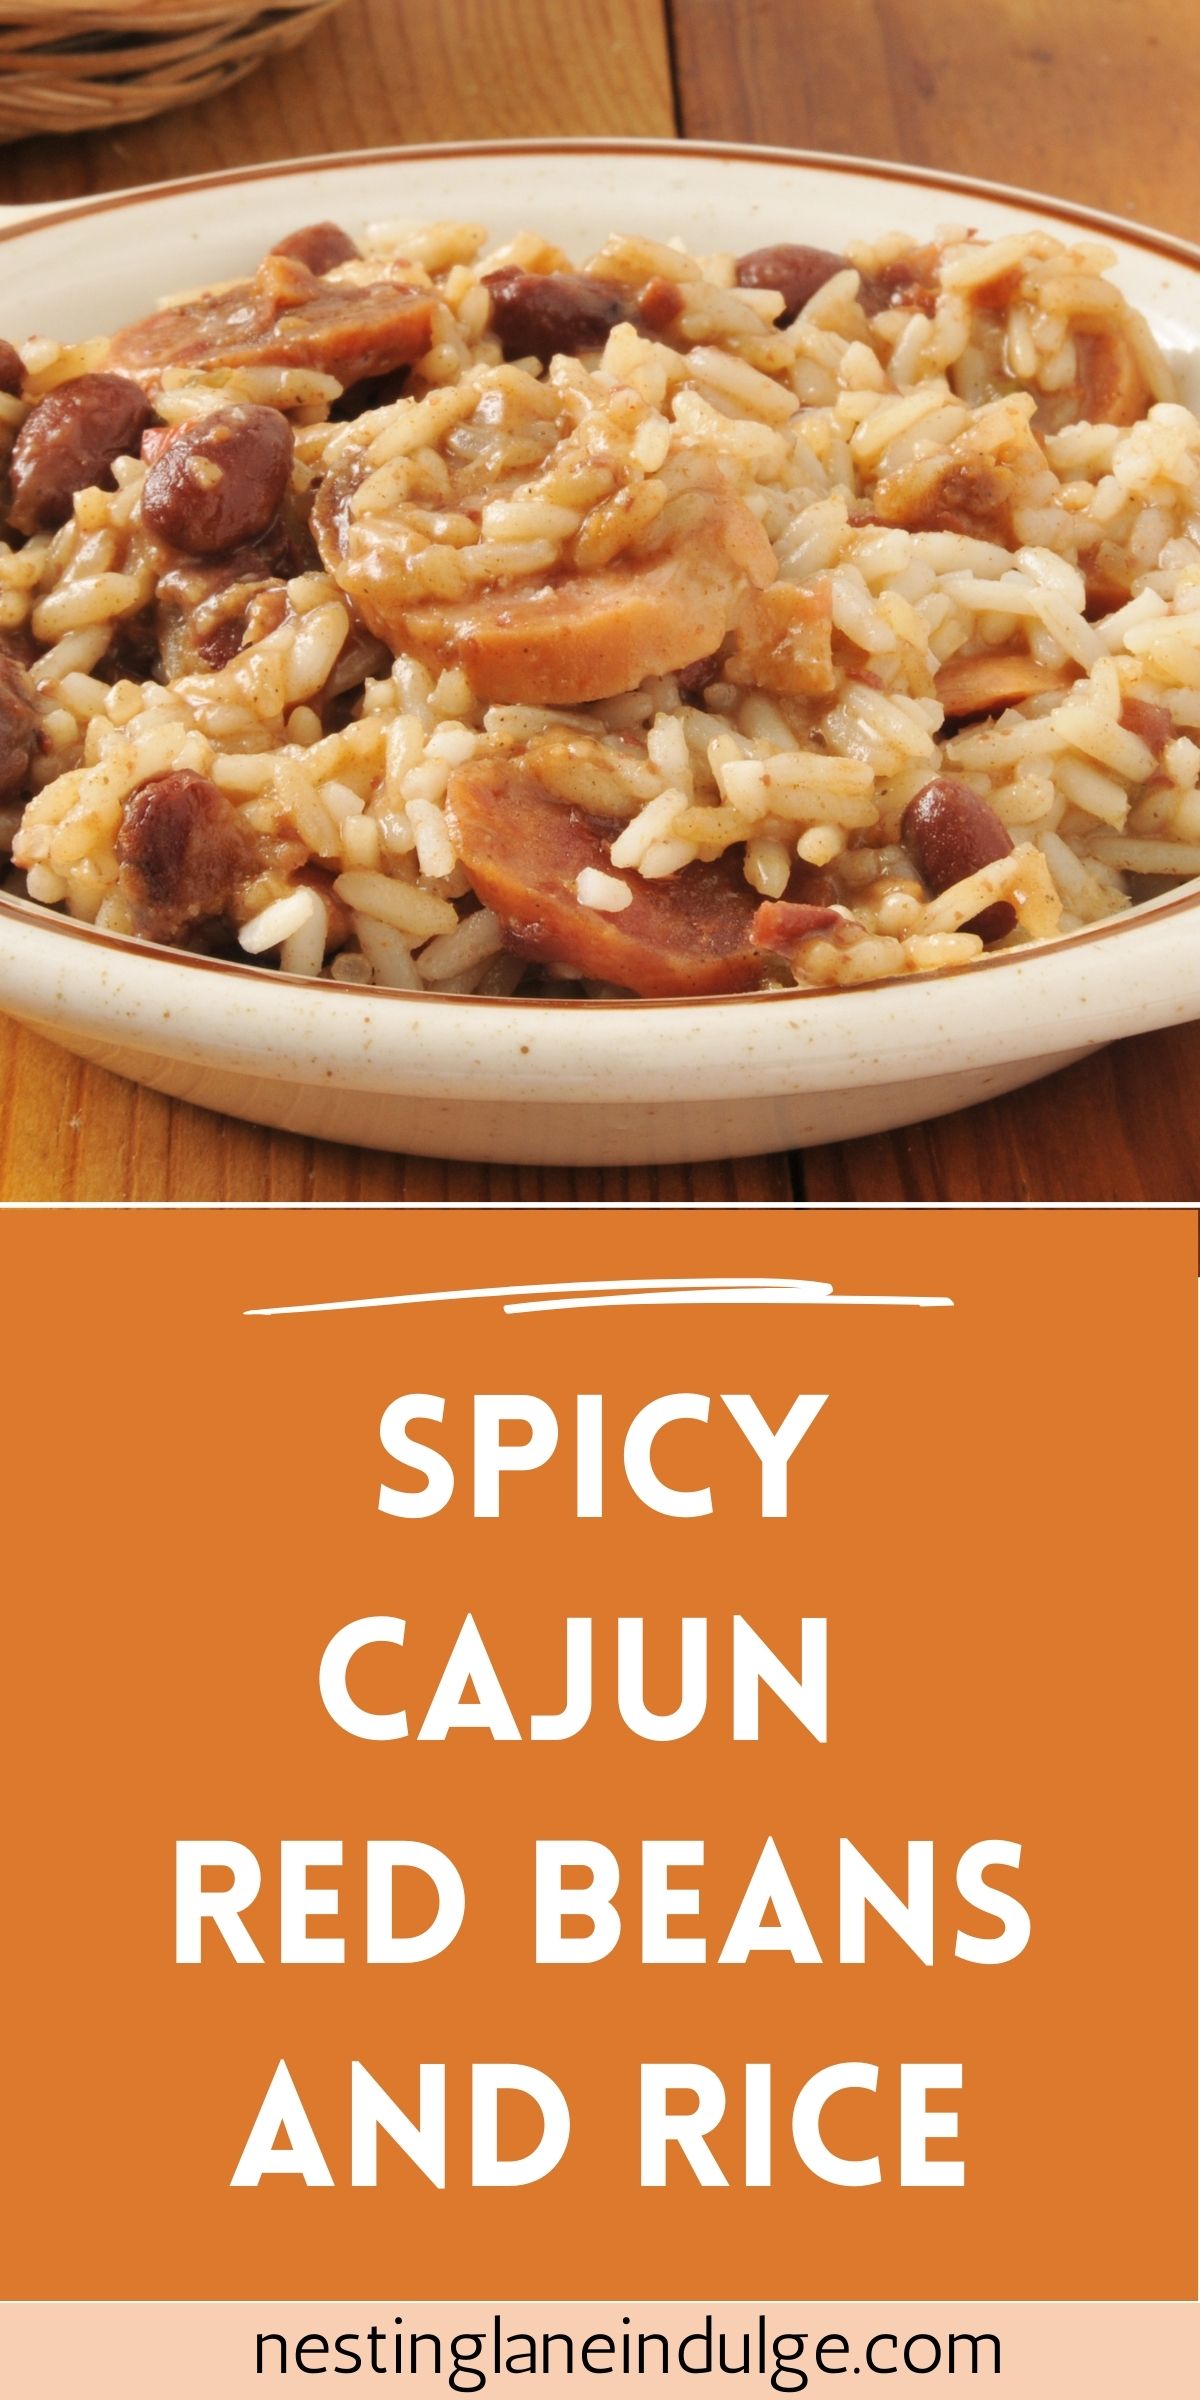 Graphic for Pinterest of Cajun Red Beans and Rice Recipe.